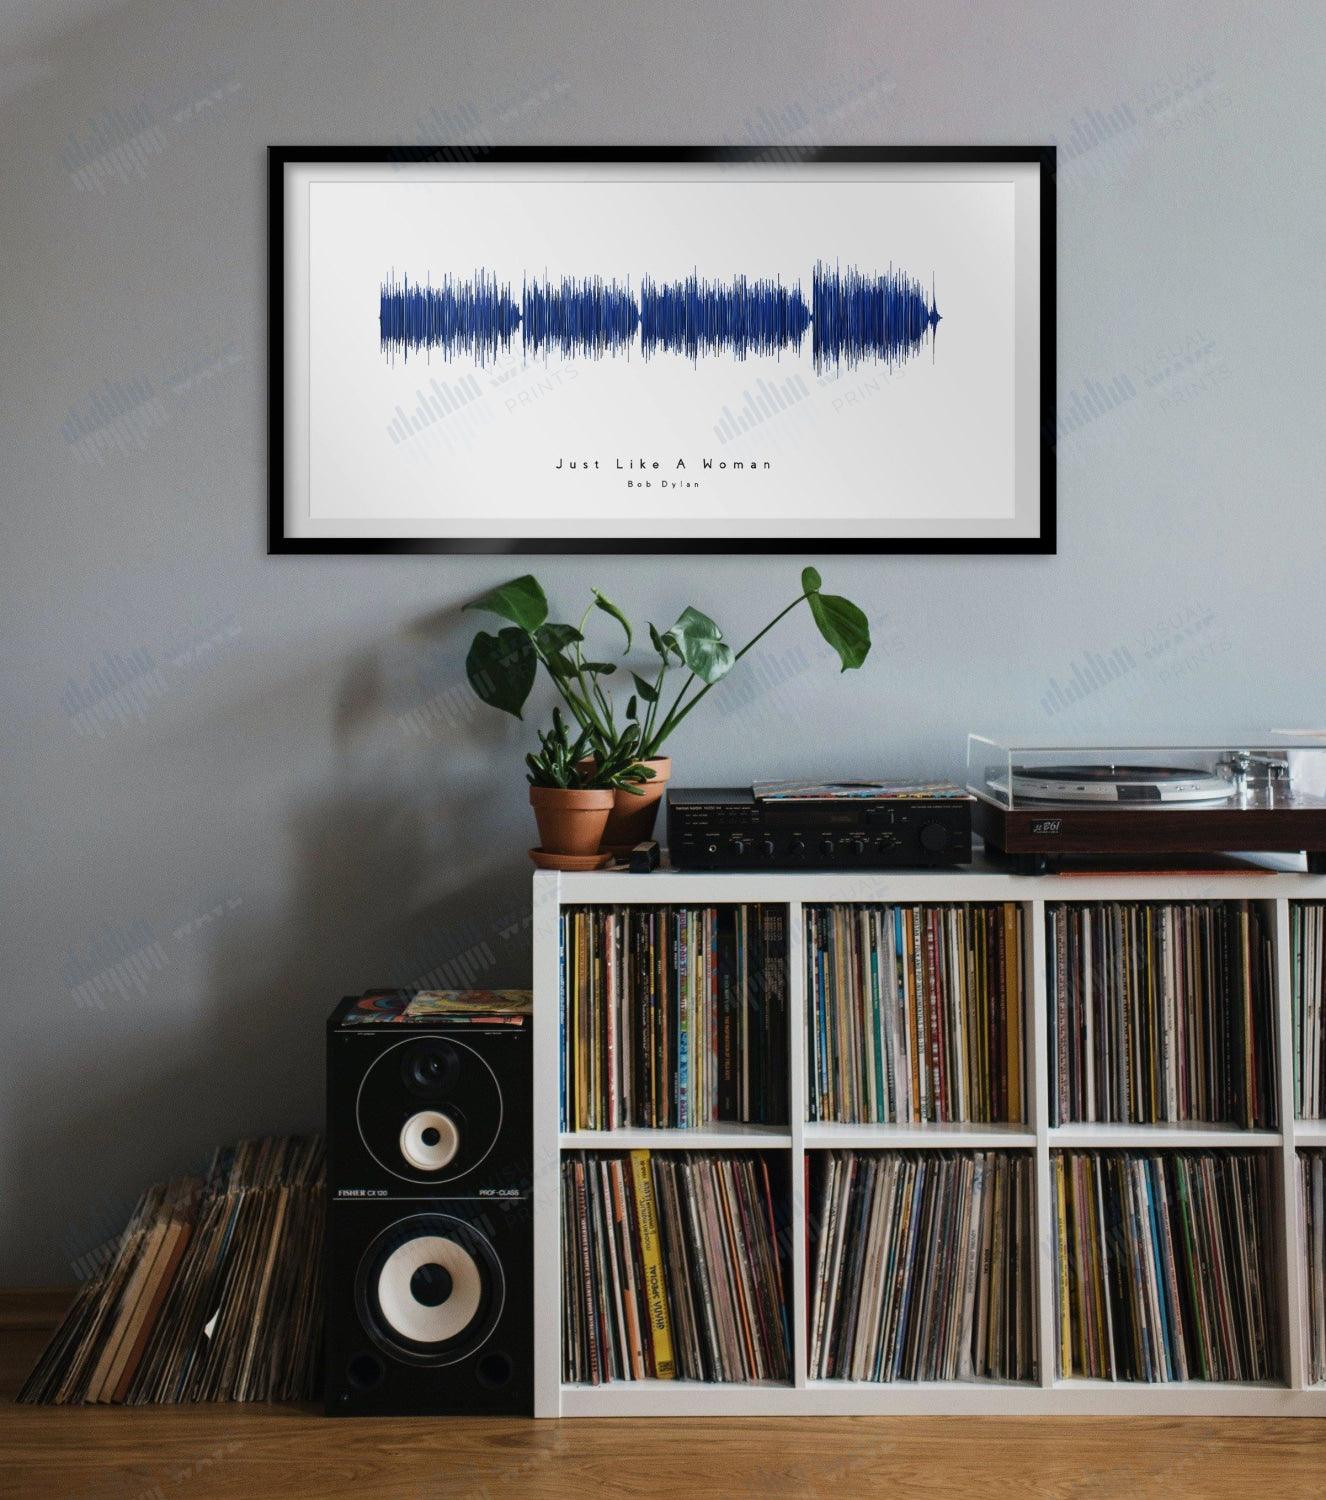 Just Like a Woman by Bob Dylan - Visual Wave Prints